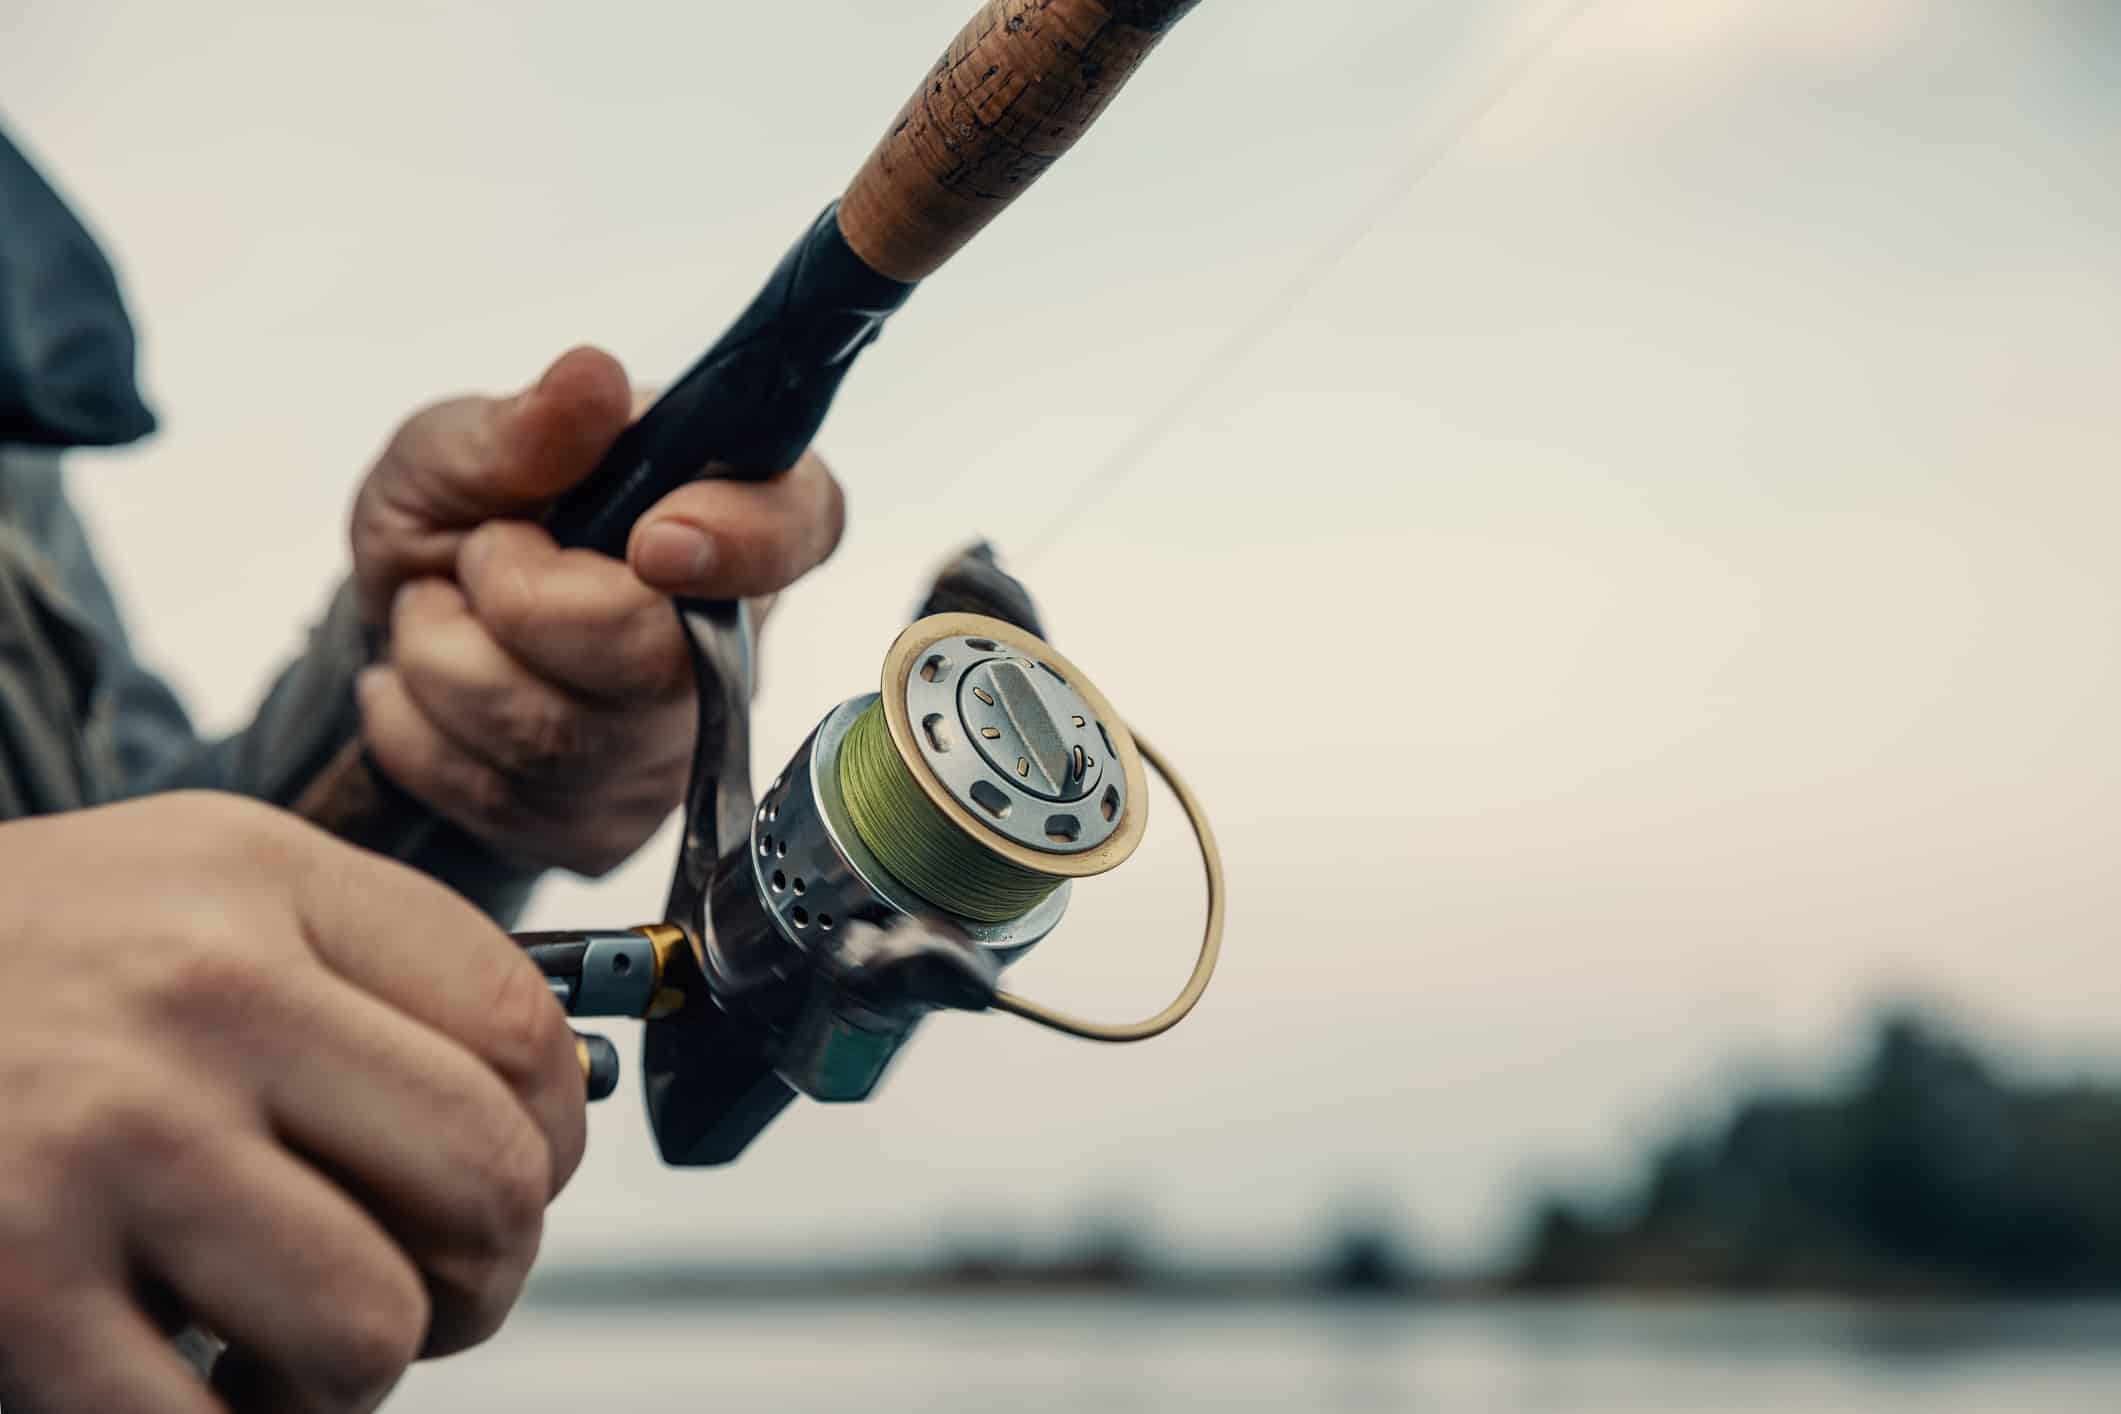 Fishing for red drum, the state fish in North Carolina, requires a fishing license